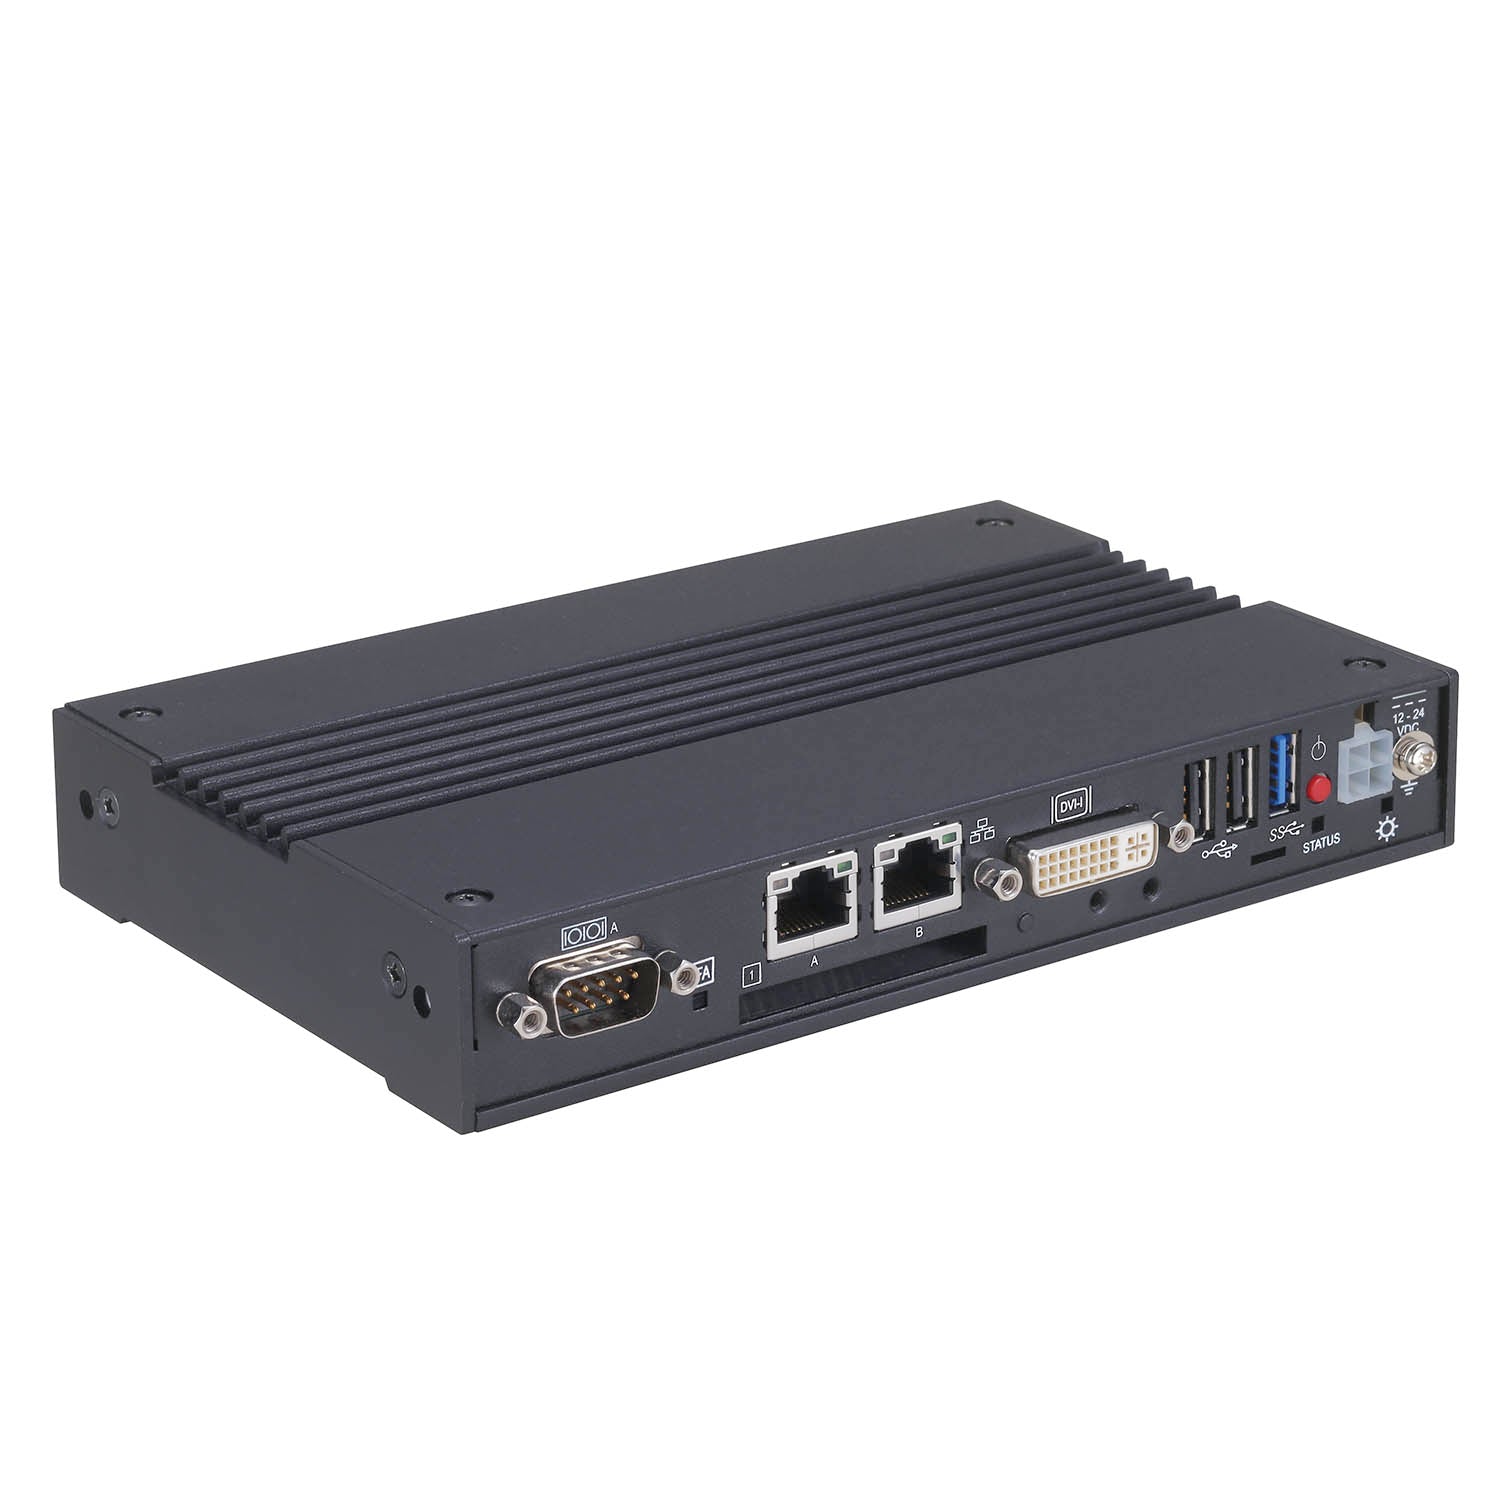 BX-220 Fanless Embedded PC / Thin Client / Intel Atom E3845 (Bay Trail) / 0-60C Operation